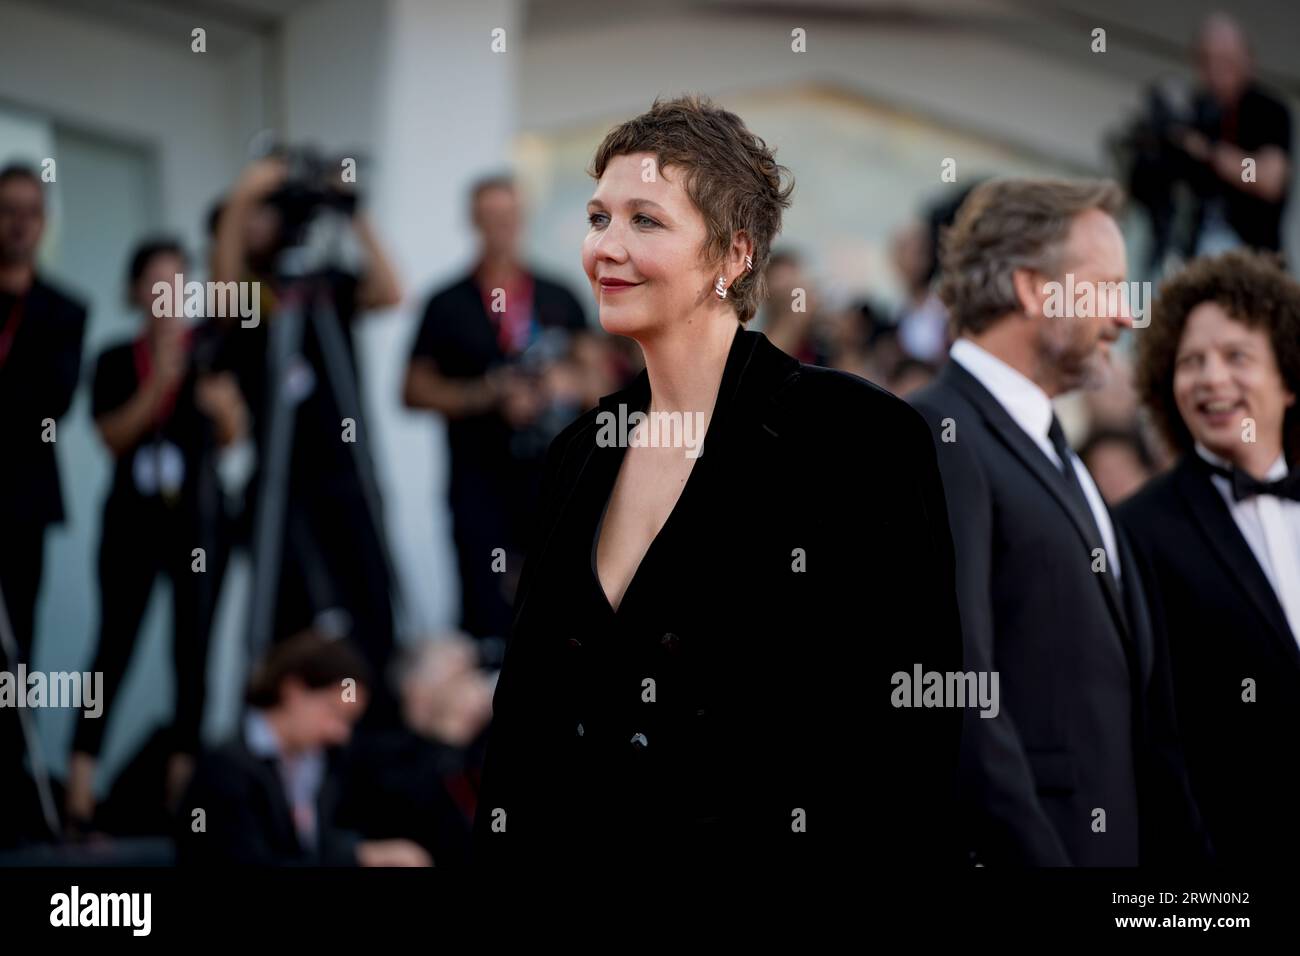 VENICE, ITALY - SEPTEMBER 09:  Maggie Gyllenhaal attends a red carpet ahead of the closing ceremony at the 80th Venice International Film Festival on Stock Photo